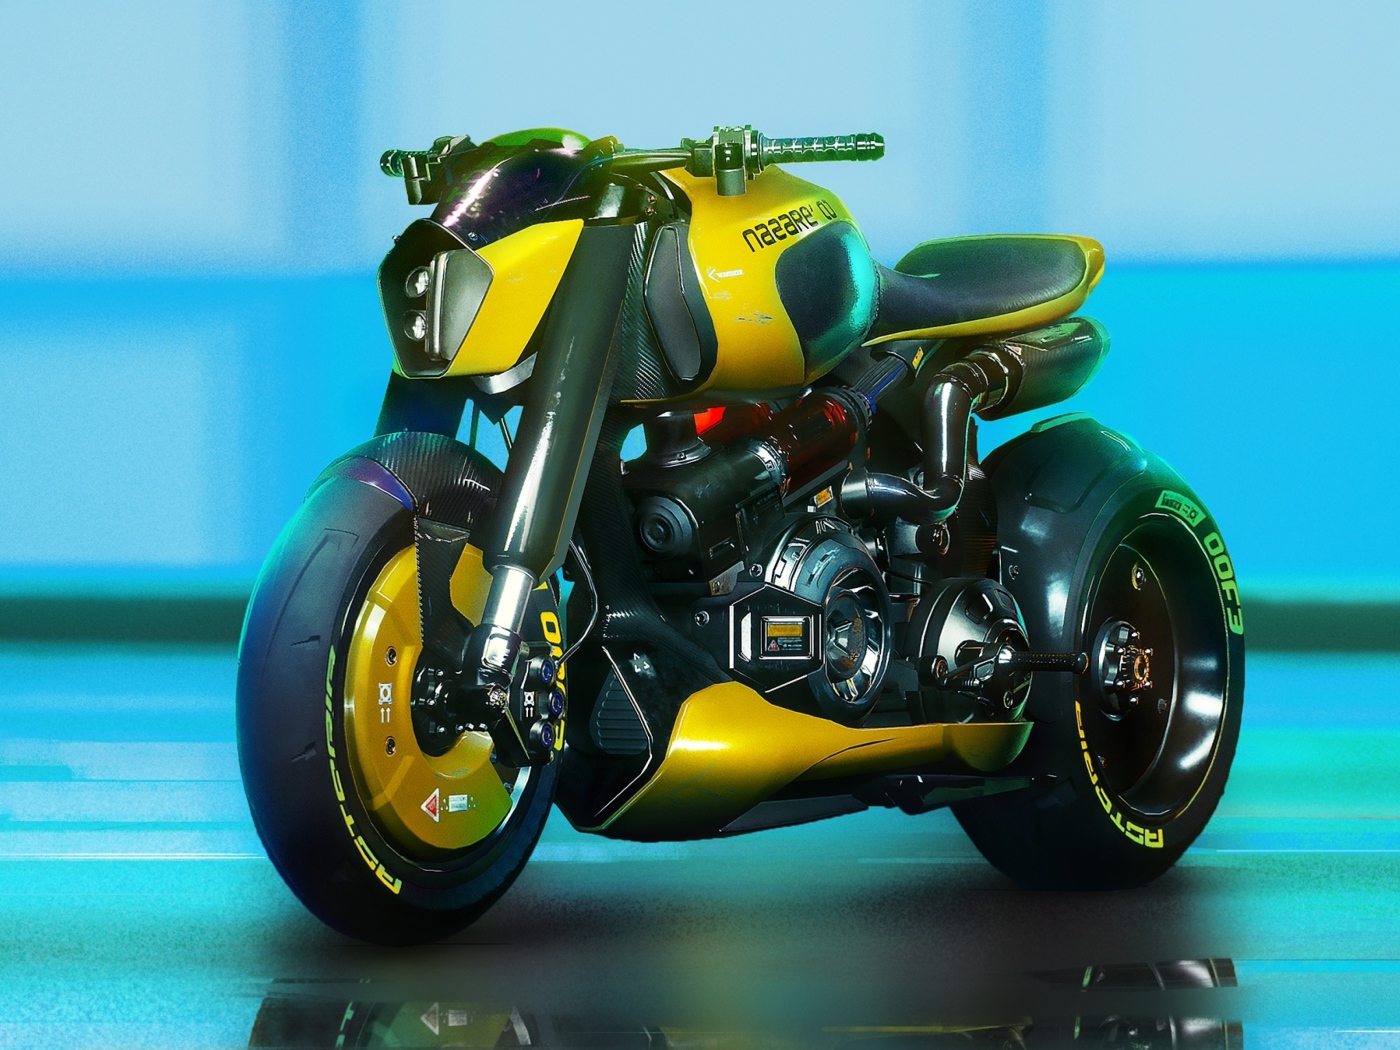 Motorcycle from the computer game Cyberpunk 2077